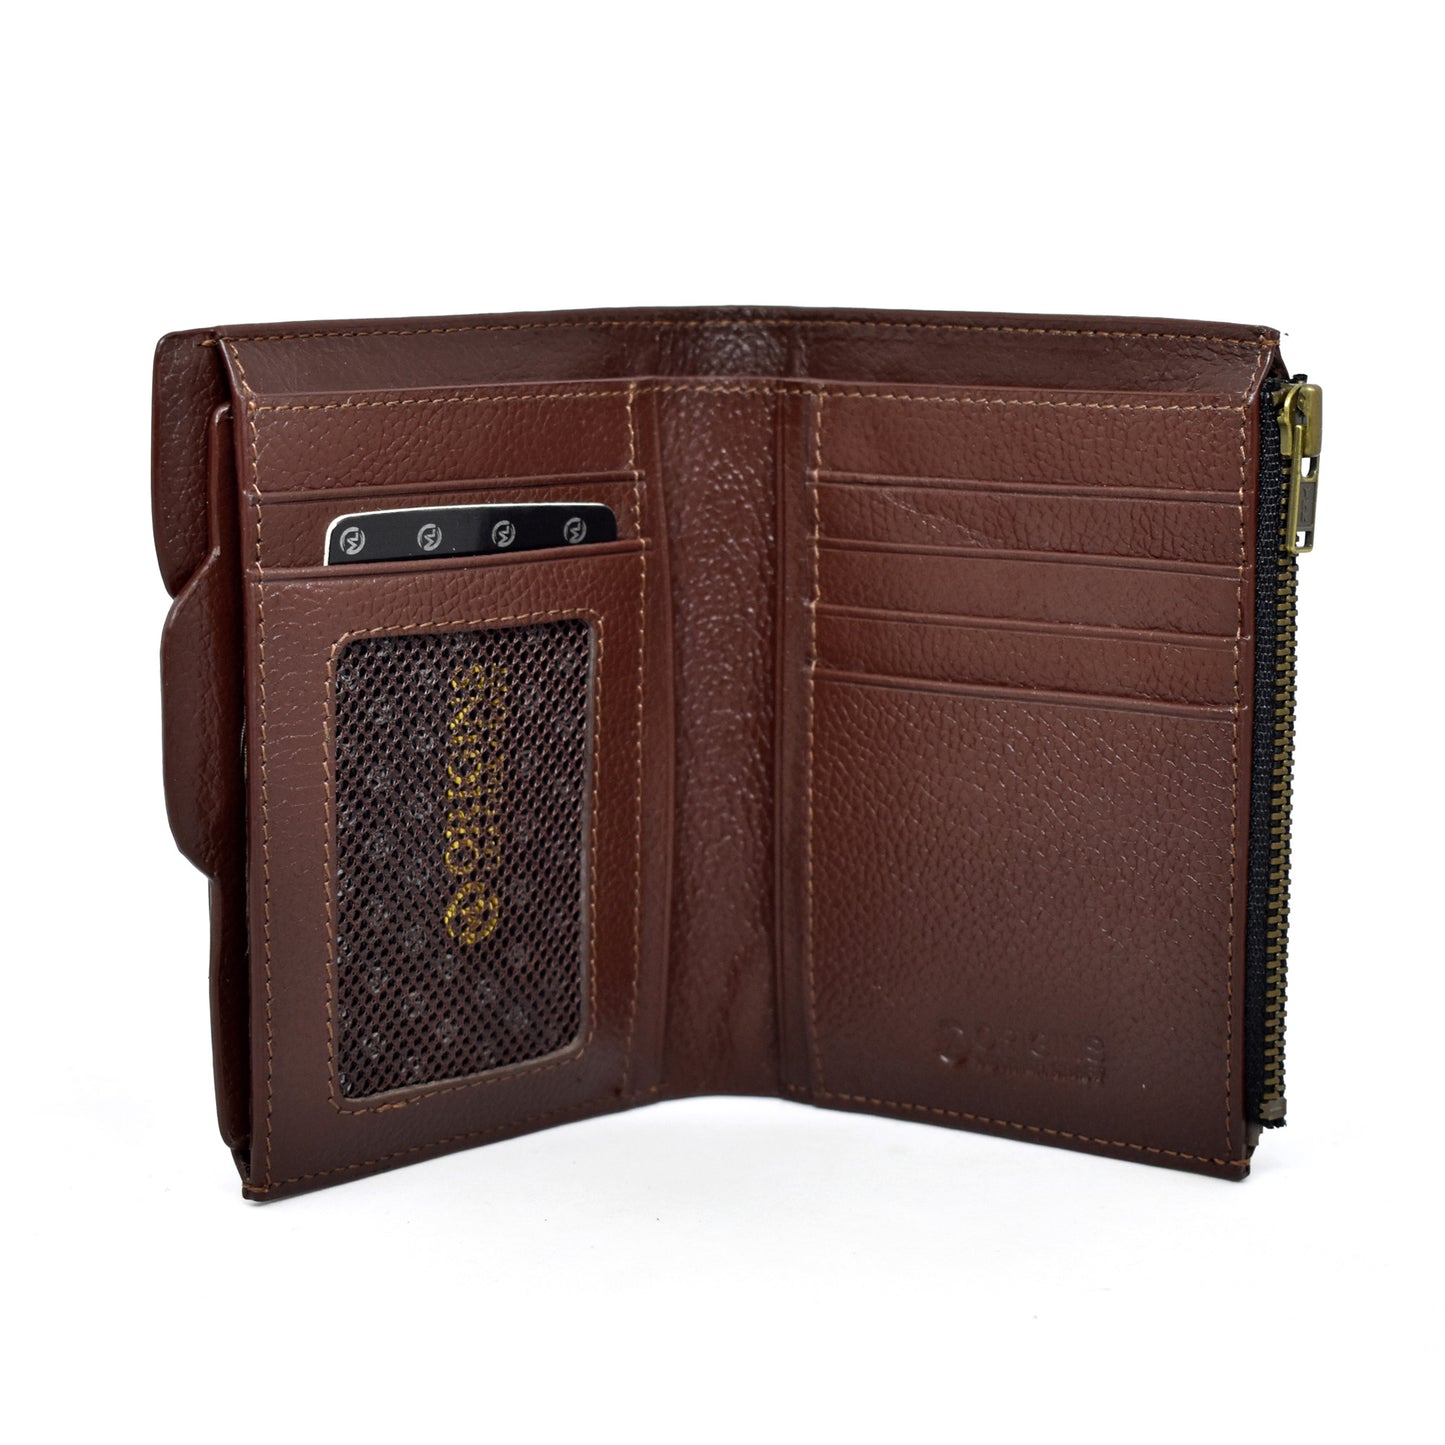 Bogesi Style Pocket Size Premium Quality Leather Wallet for Men | ORGN Wallet 04